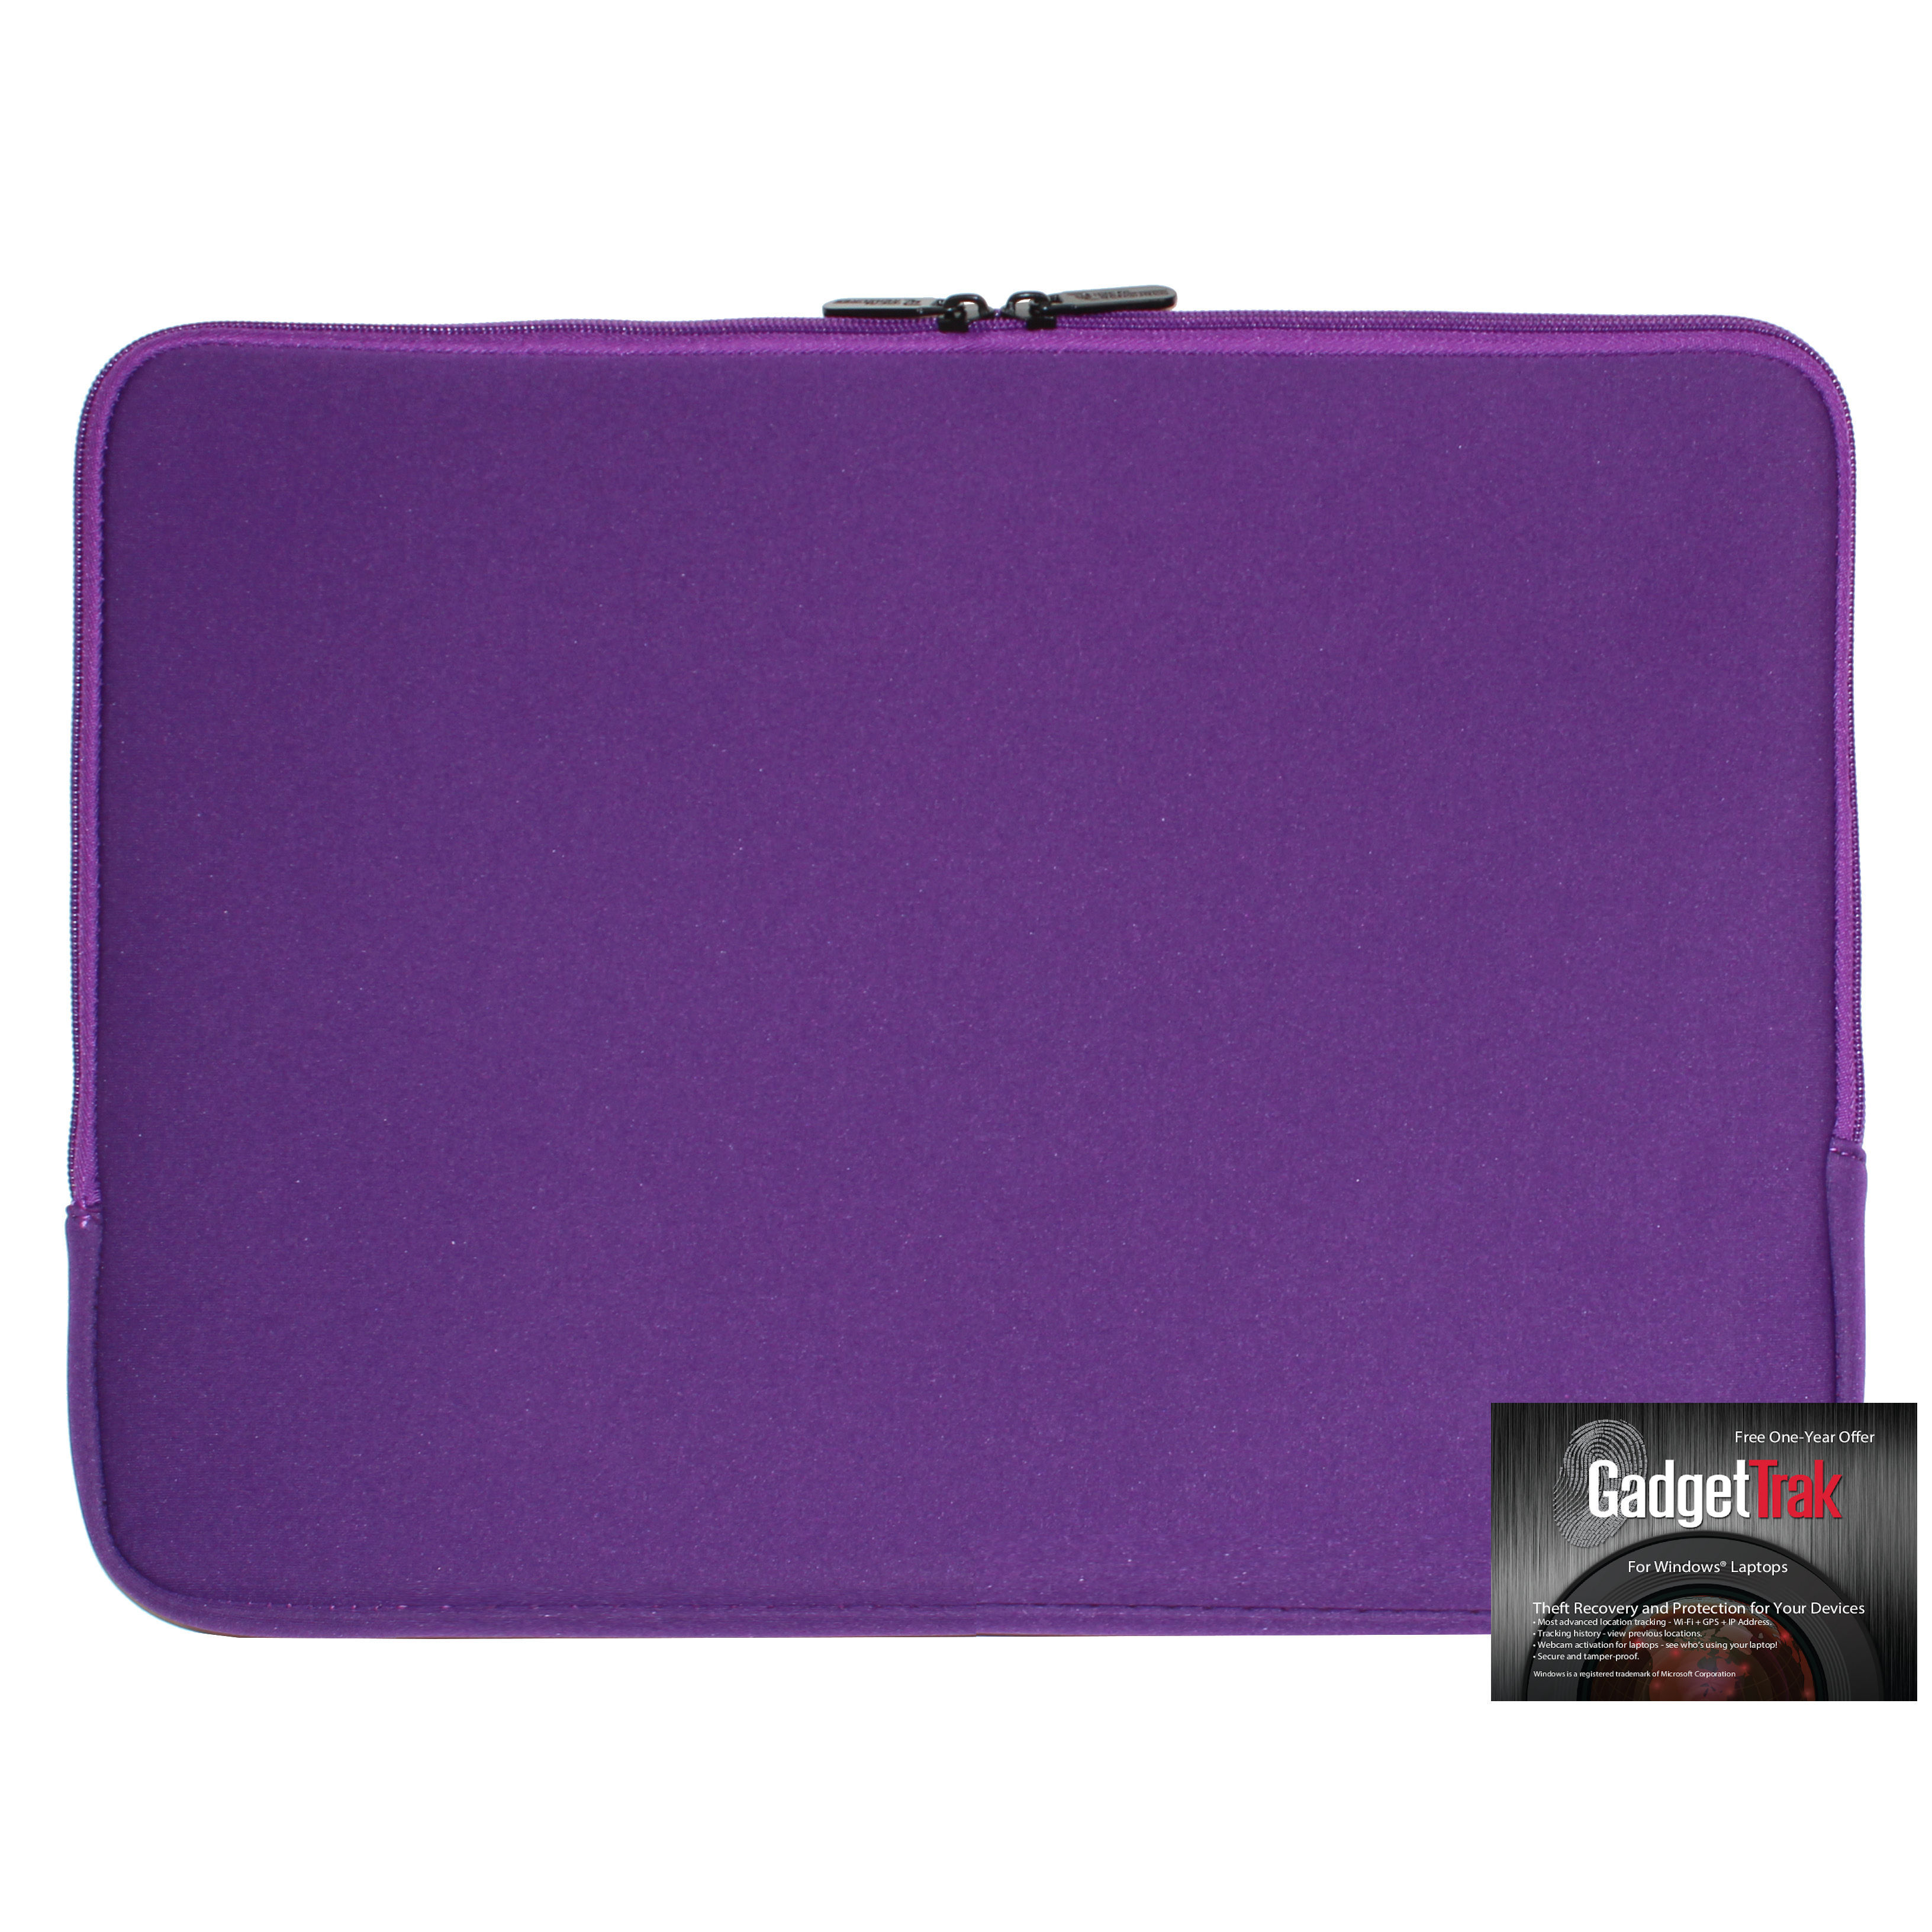 SlipIt 15.6" Laptop Sleeve with 1 Year Free GadgetTrak Subscription. A $19.95 value. - image 1 of 4